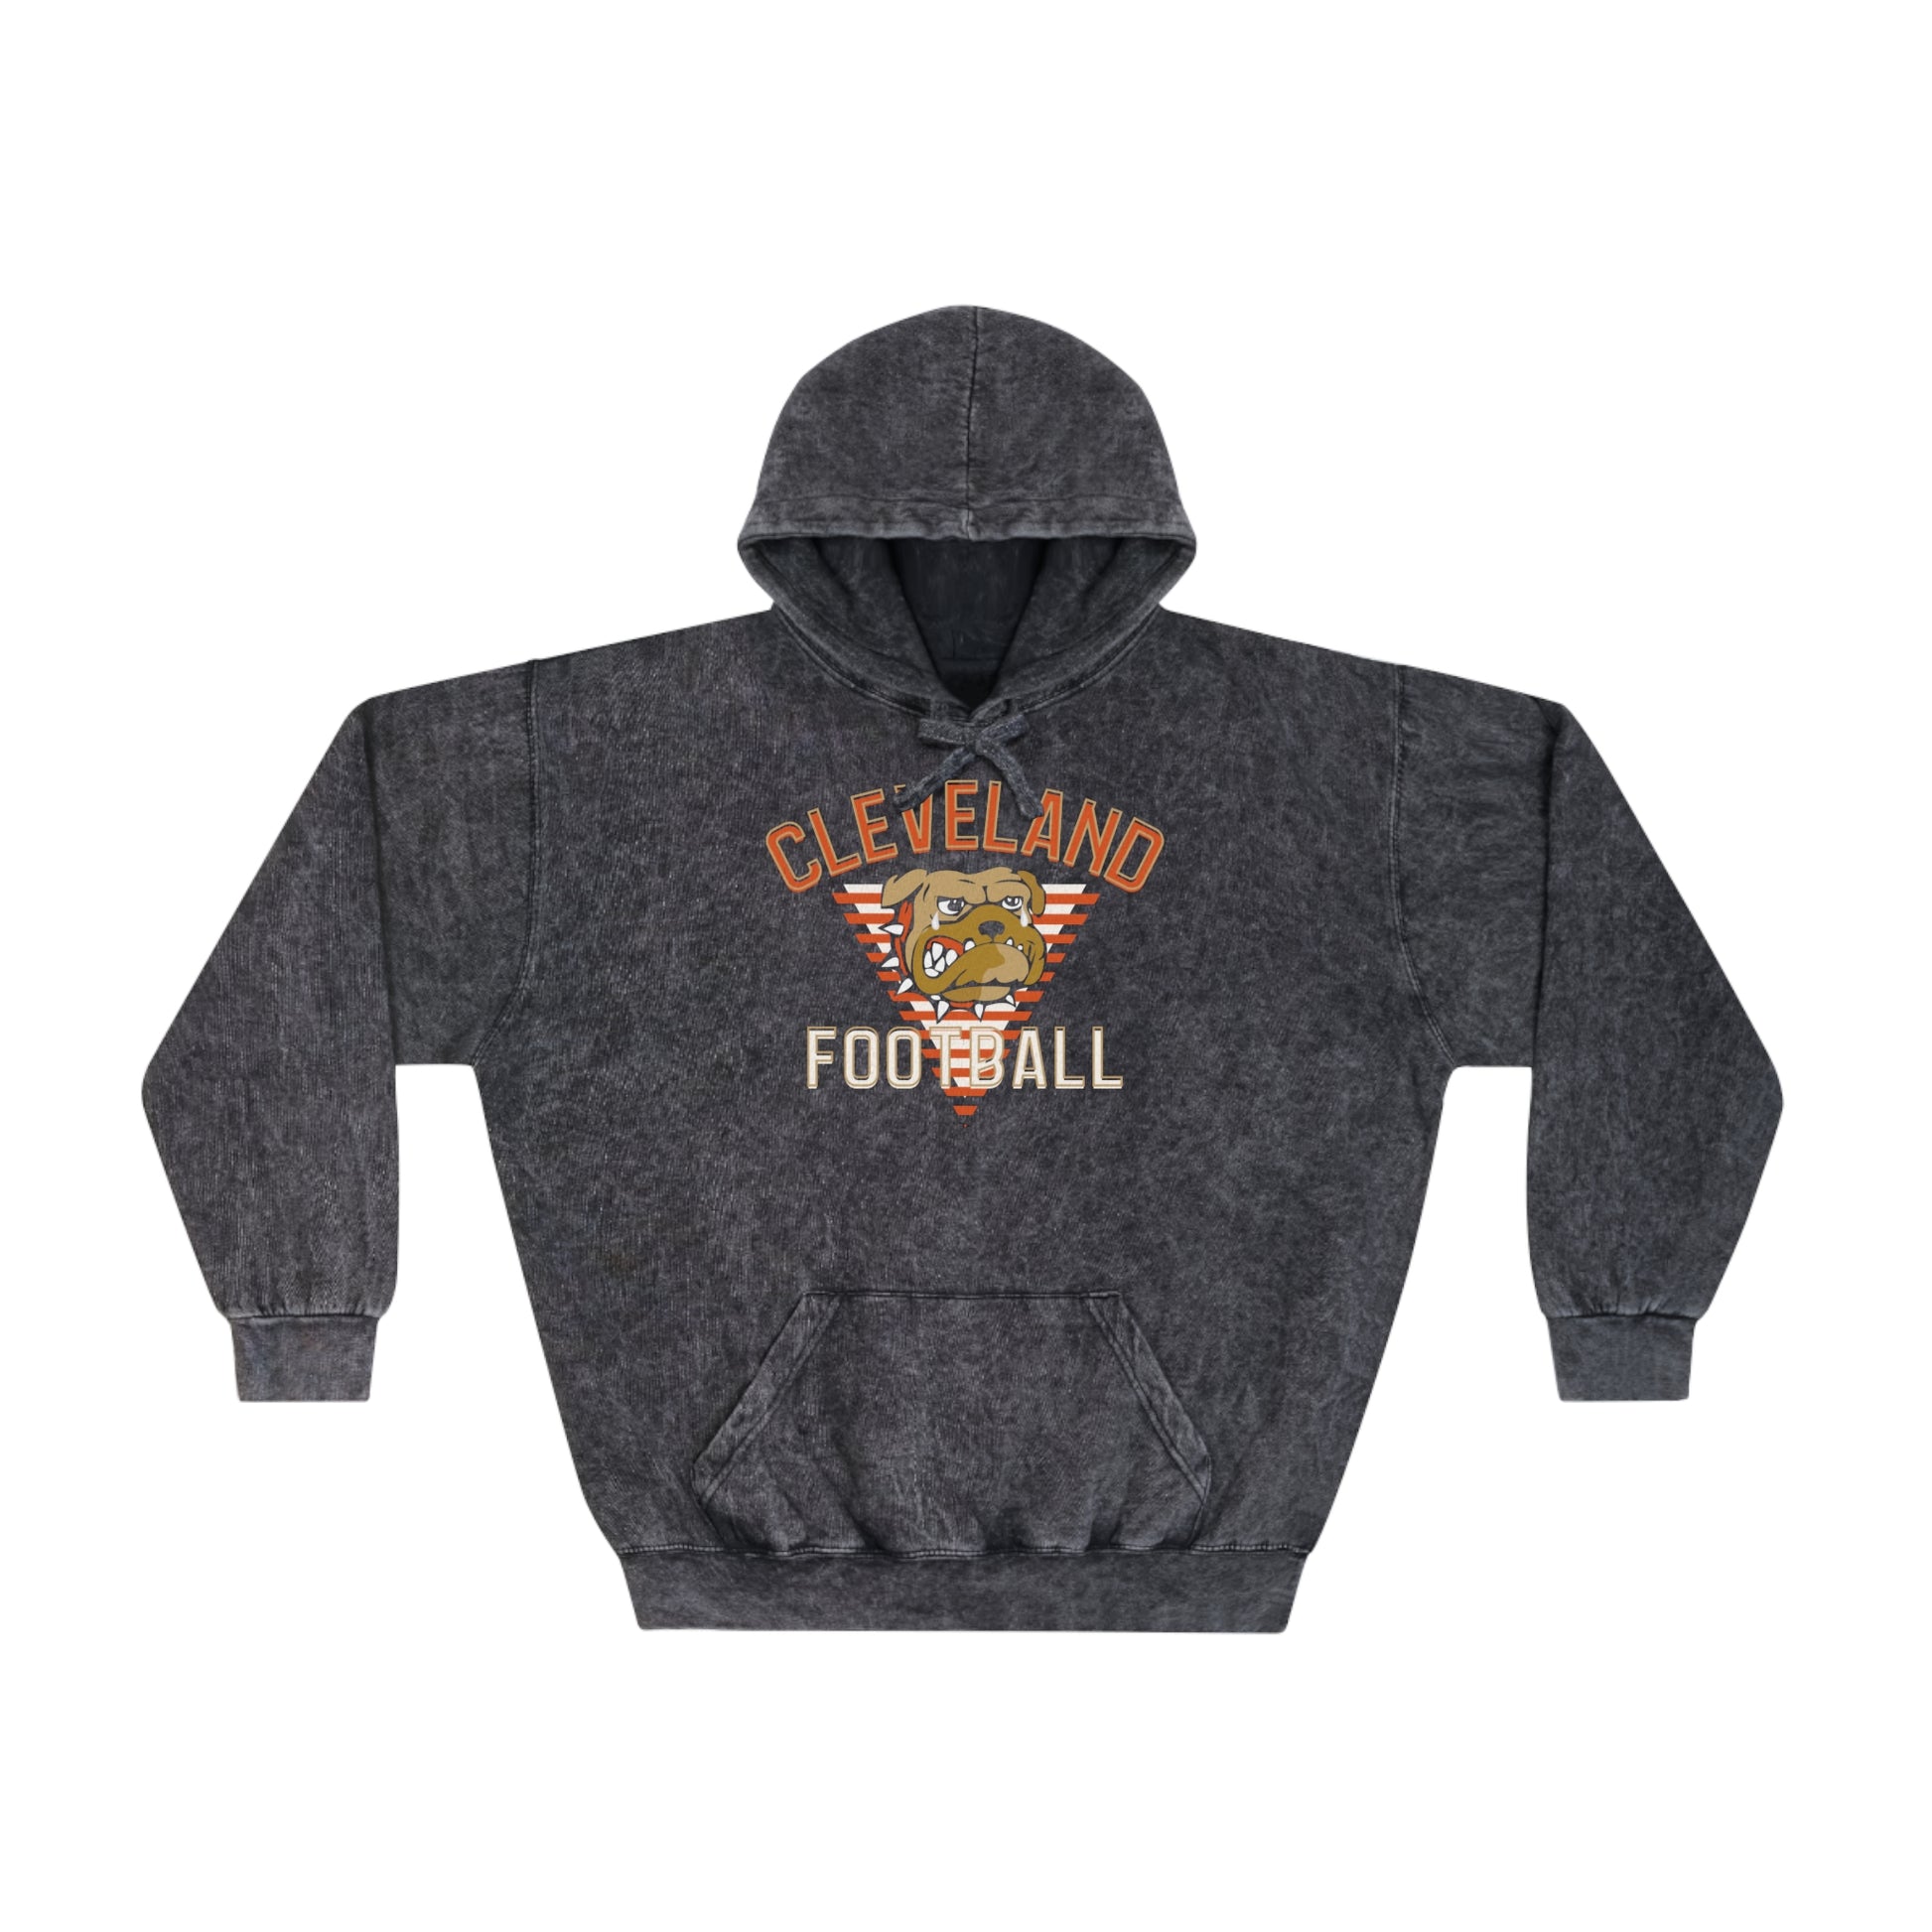 Vintage Cleveland Browns Hoodie - Tie Dye Browns Sweatshirt - Hippy Ac –  The Dallas Family Apparel Company